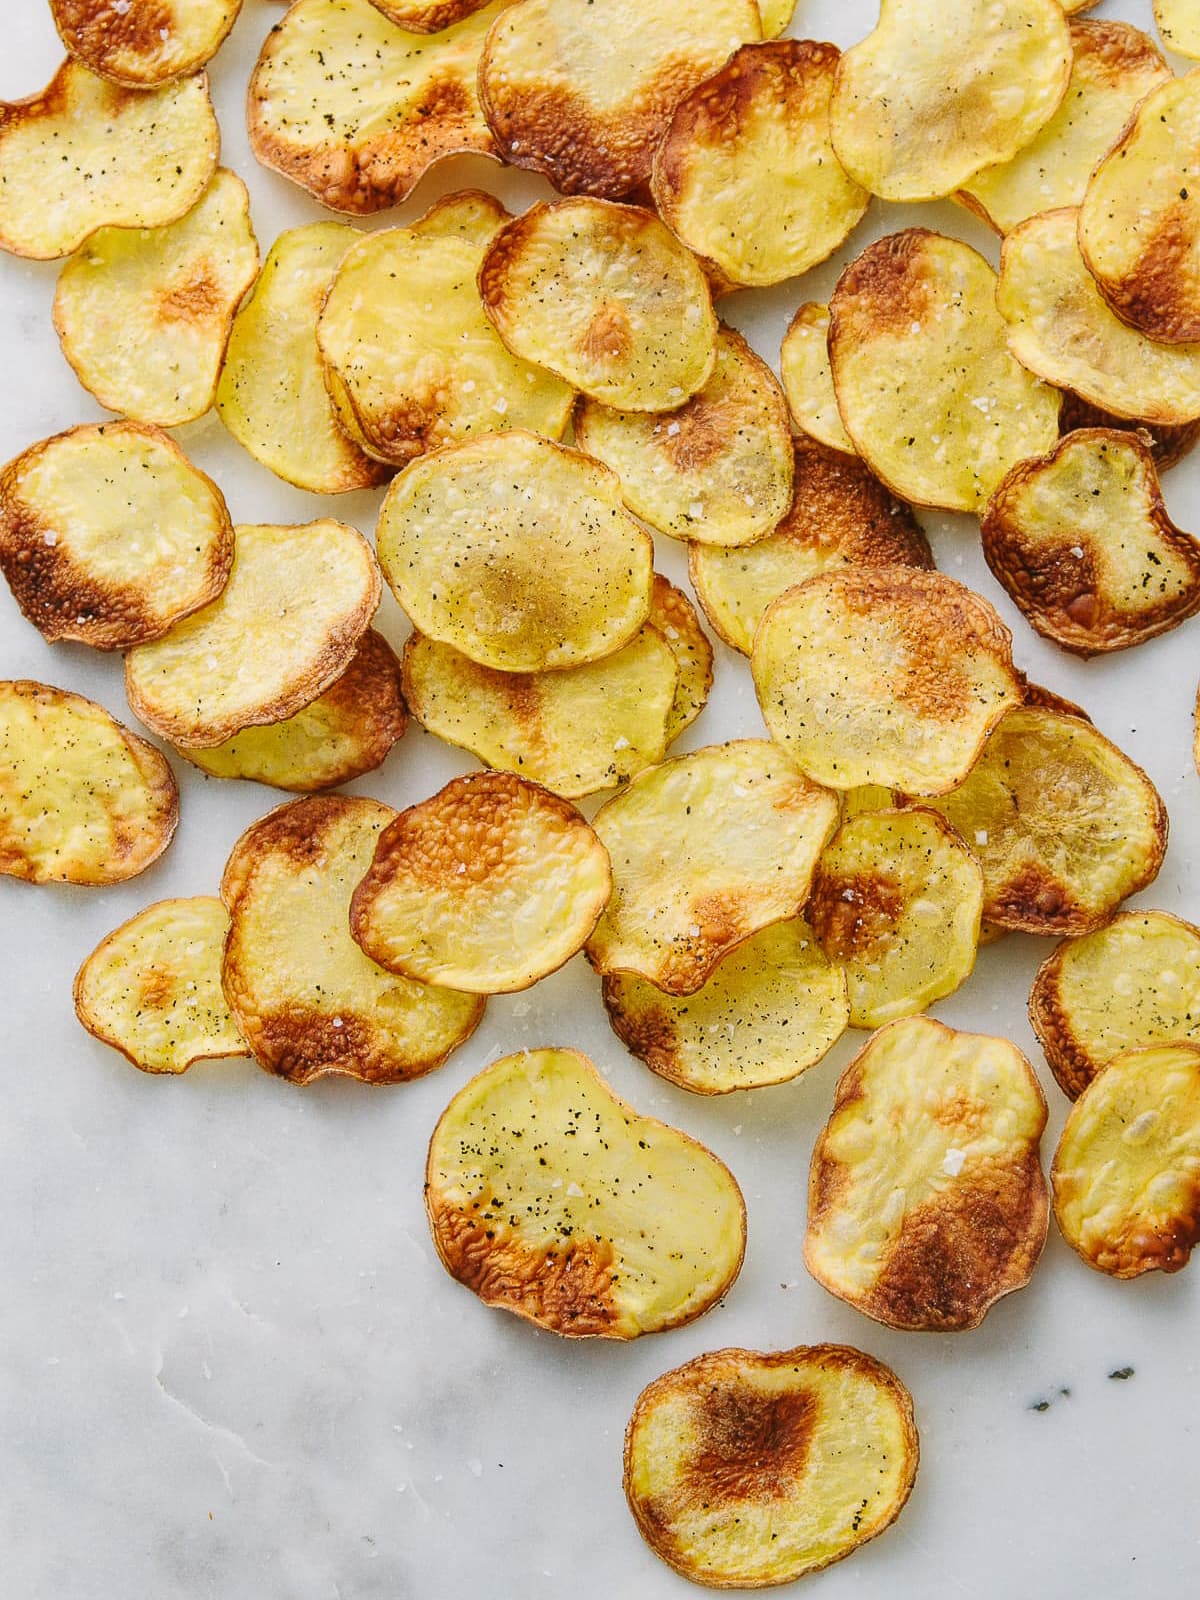 Baking Potatoes in a Toaster Oven  : Crispy Perfection at Home